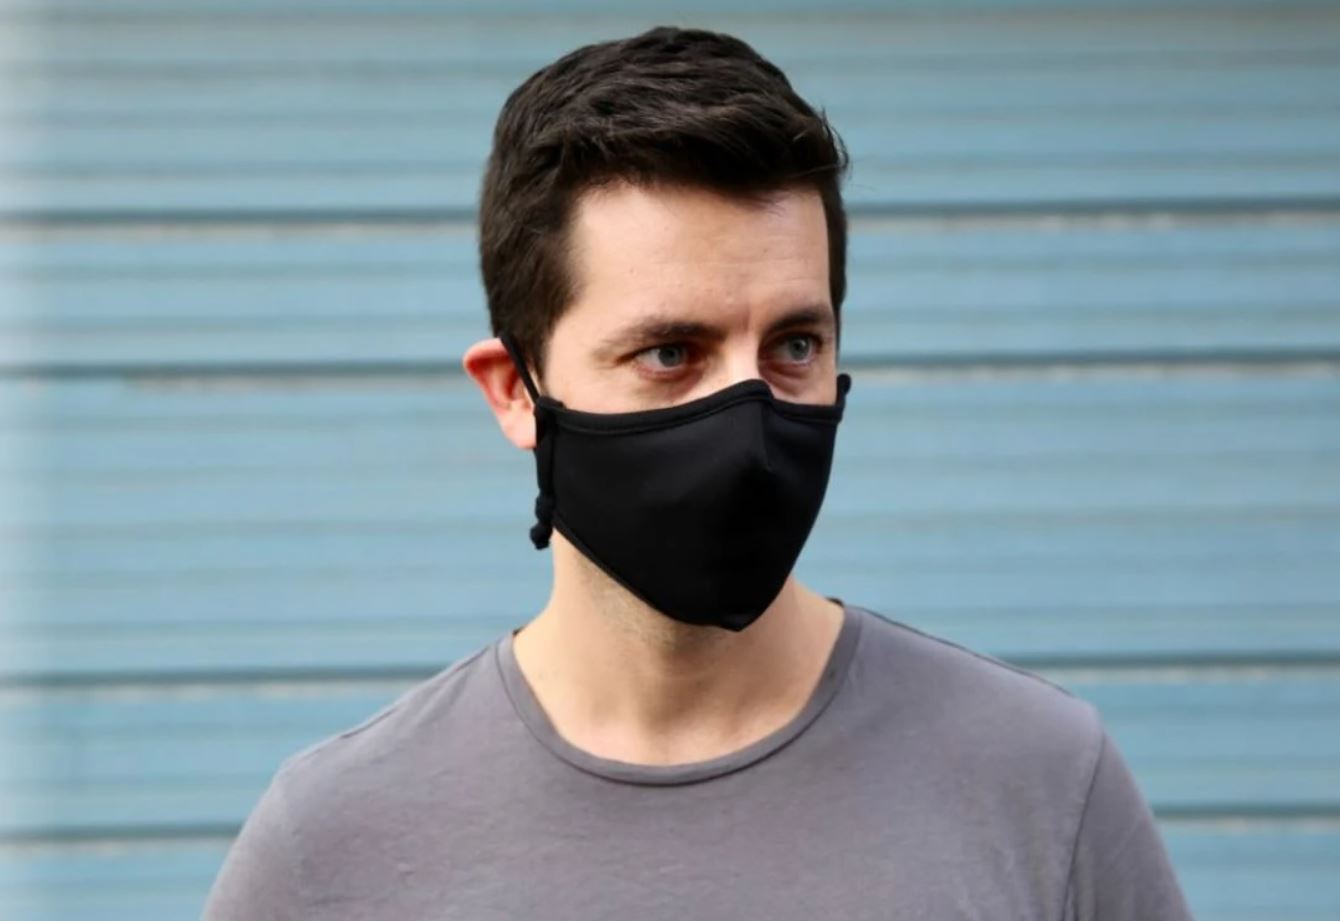 The Best Coronavirus Face Mask Protection According to New CDC Guidelines